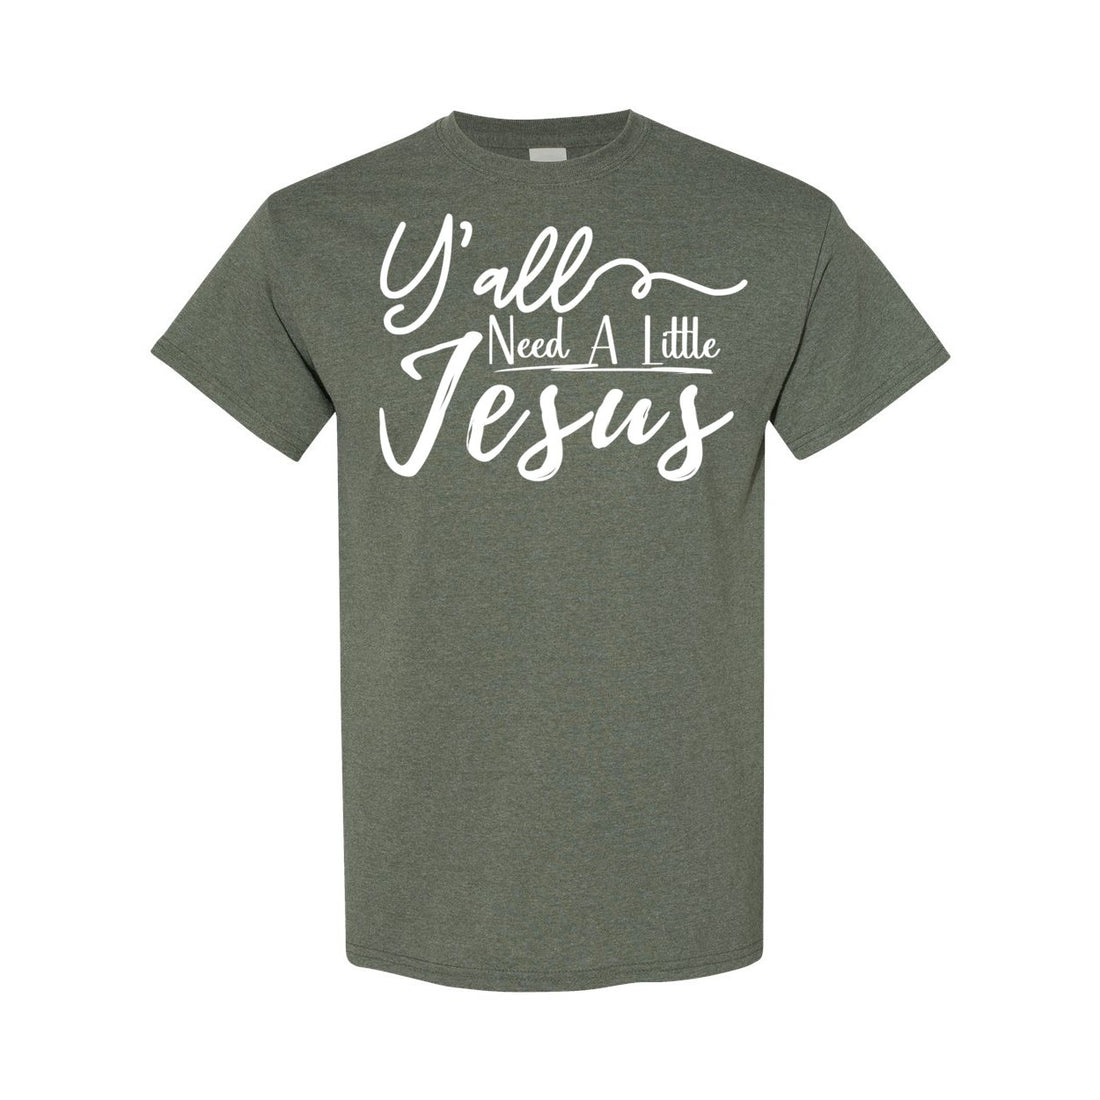 Y'all Need Jesus Cotton T-Shirt - T-Shirts - Positively Sassy - Y'all Need Jesus Cotton T-Shirt